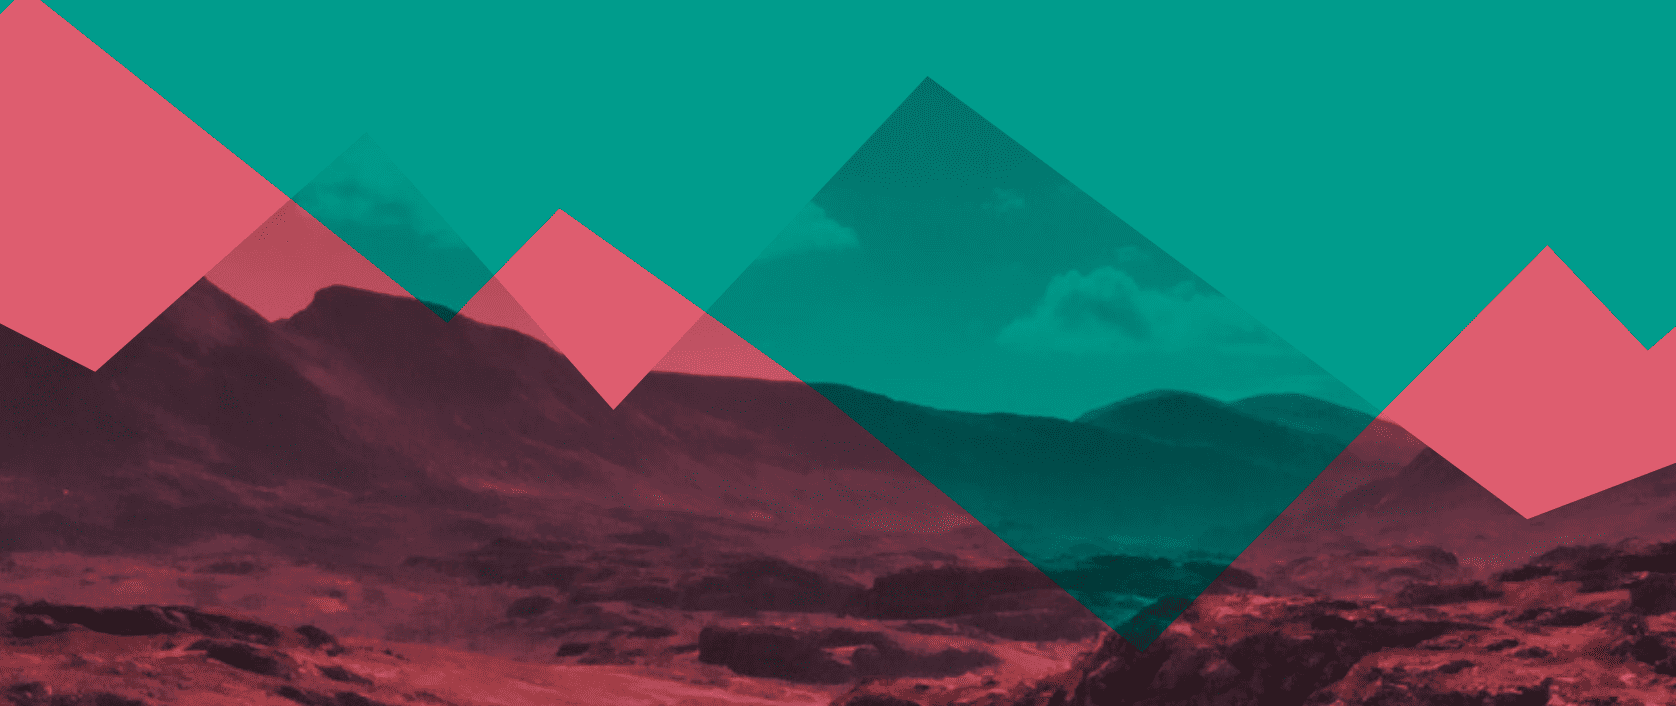 Abstract green and pink mountain scene